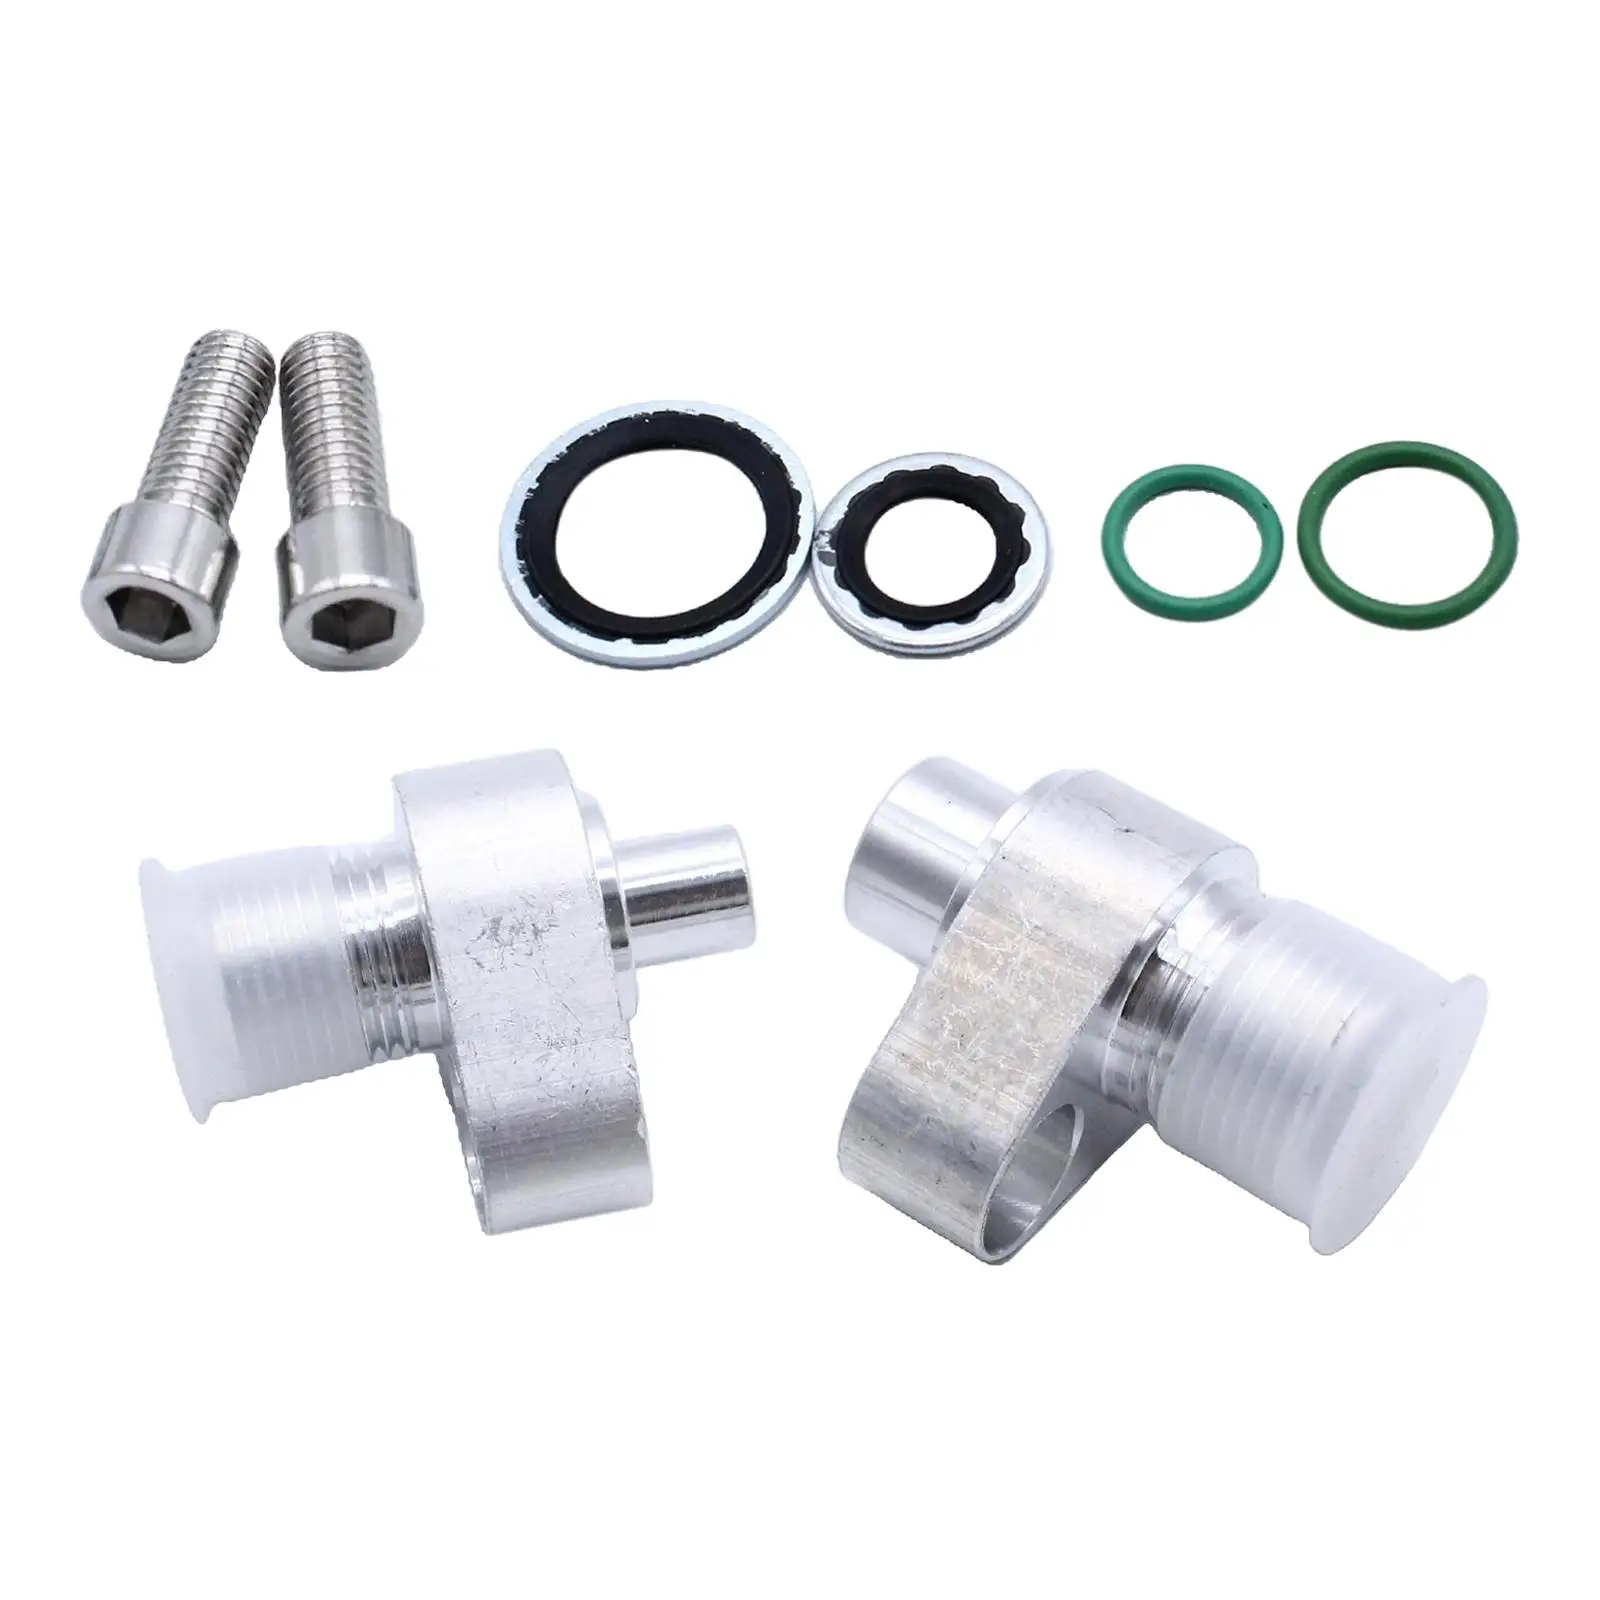 451-1105 440-822 DS345061 440-823 cessories Parts 451-1106 W10 Compressor Connector Adapter Fittings 0S20F 10S17F